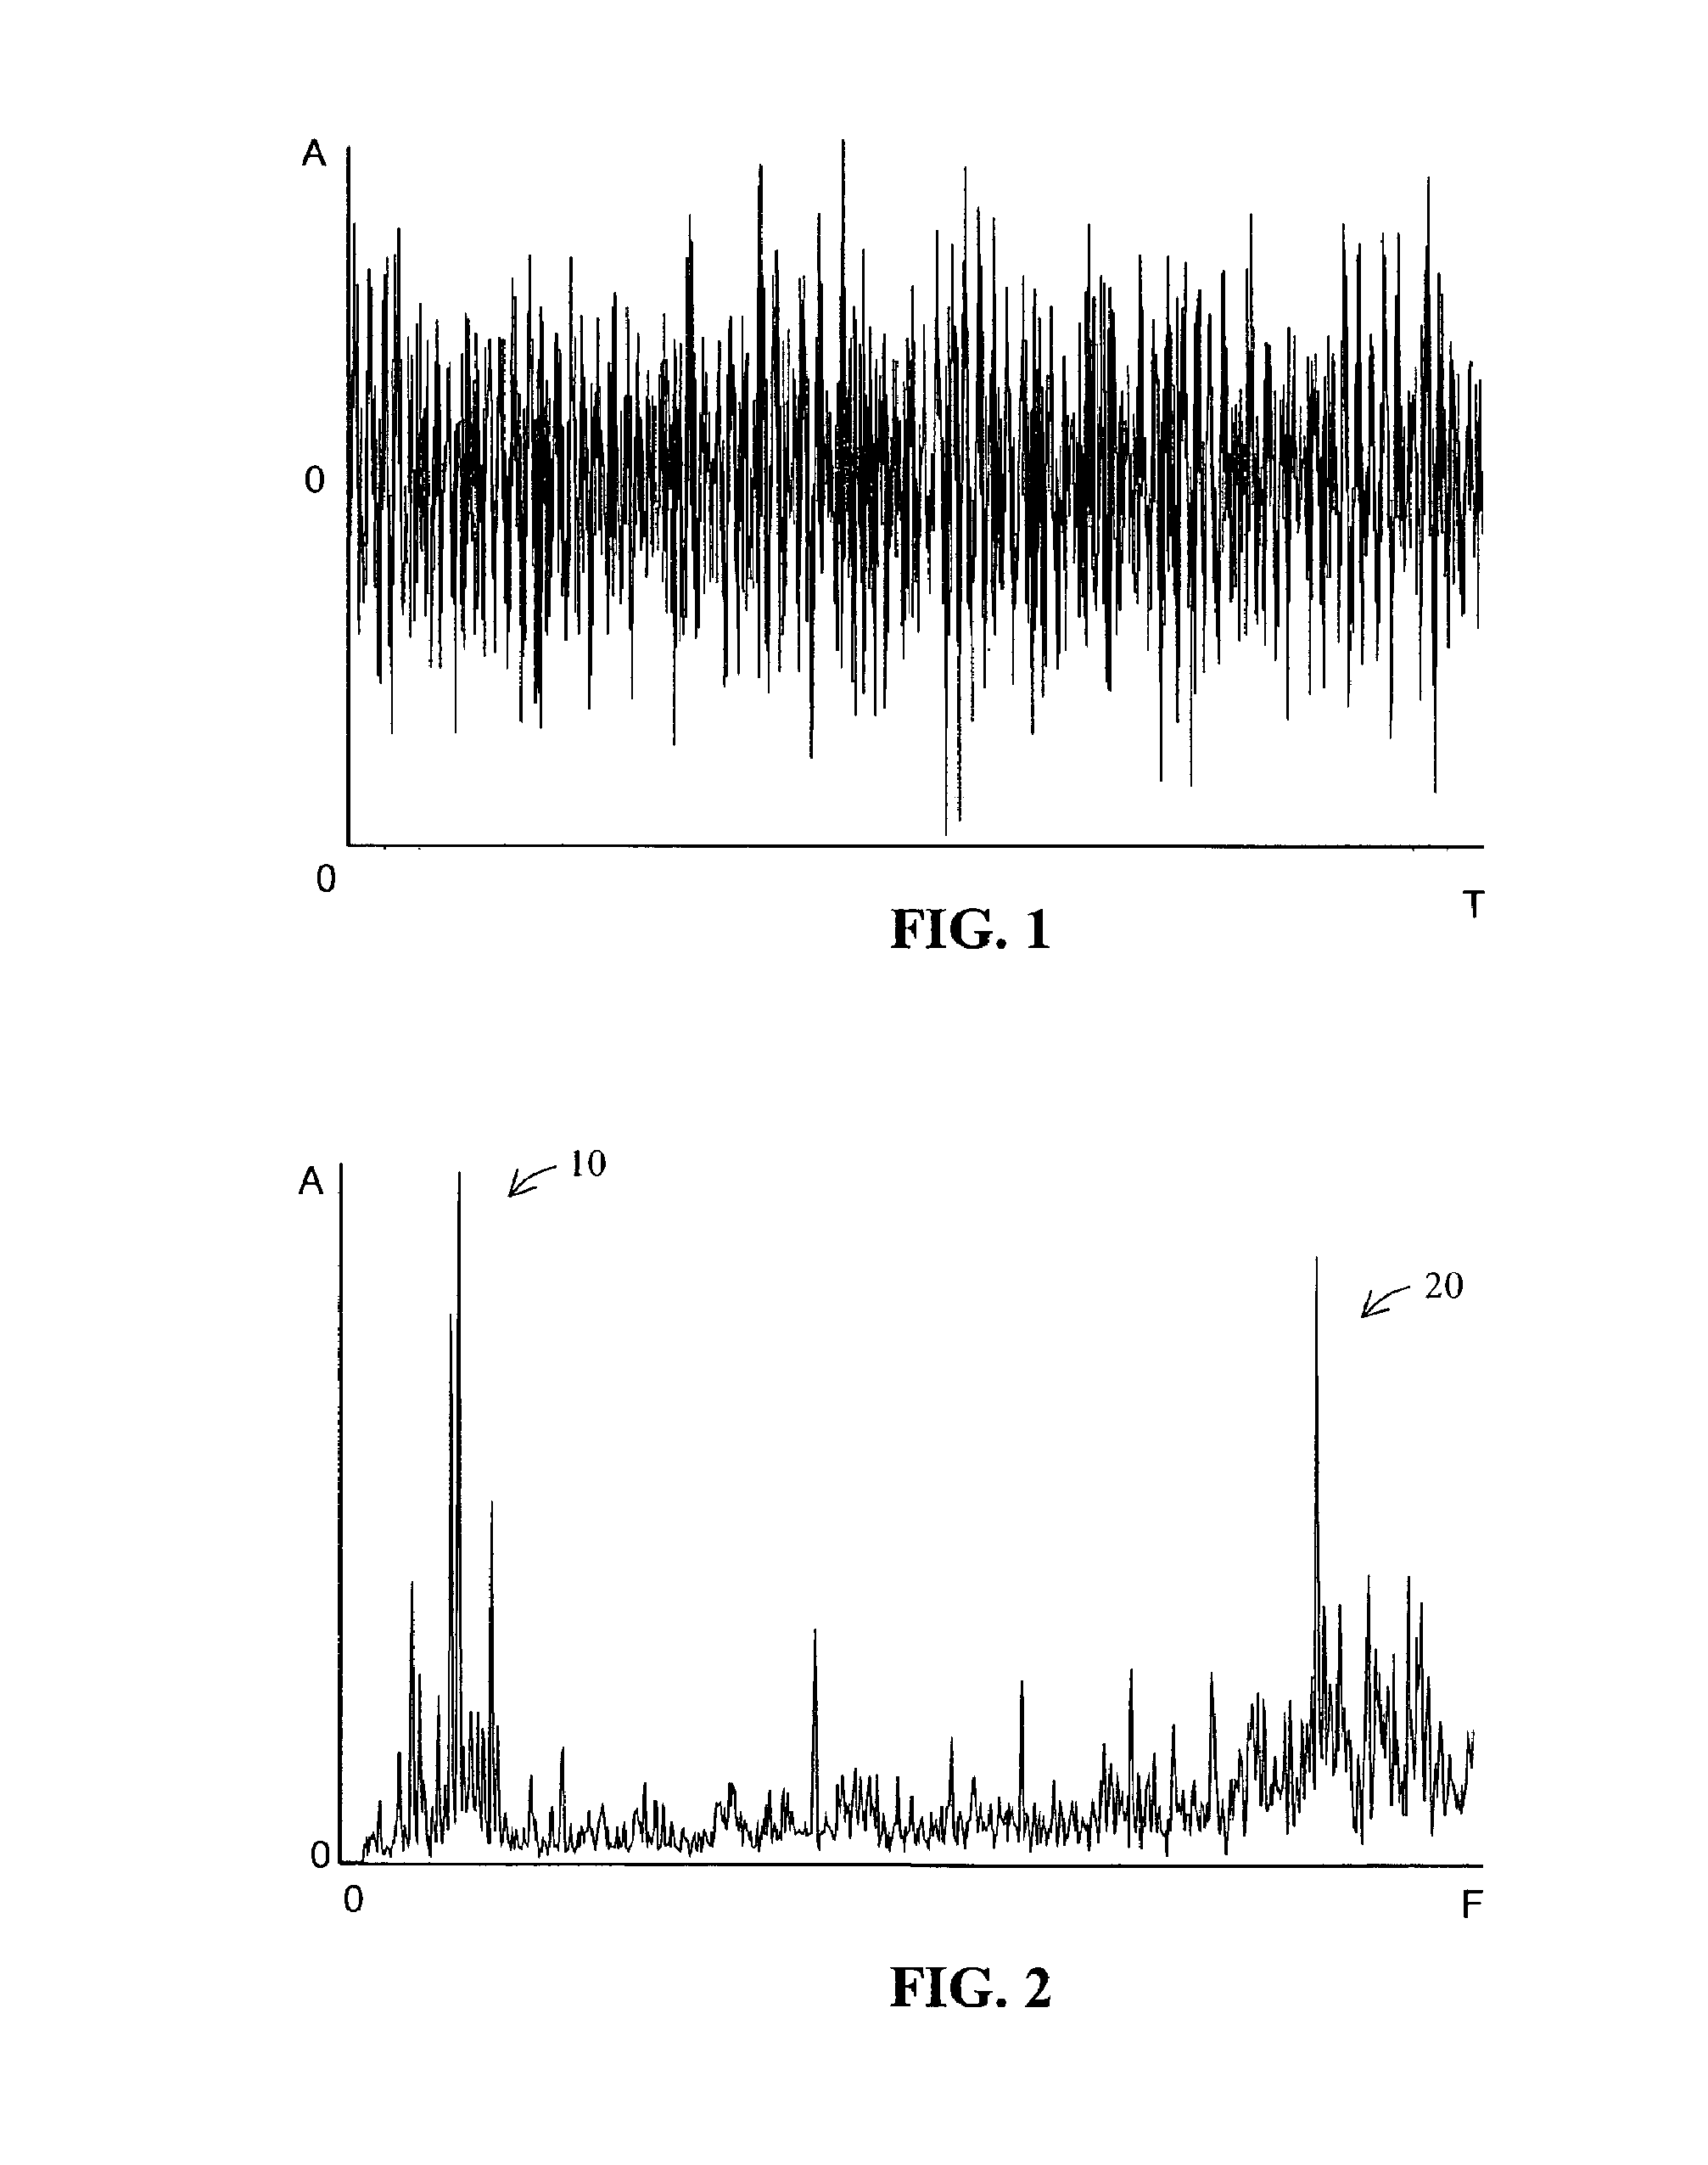 Systems and Methods for Energy Efficient Machine Condition Monitoring of Fans, Motors, Pumps, Compressors and Other Equipment